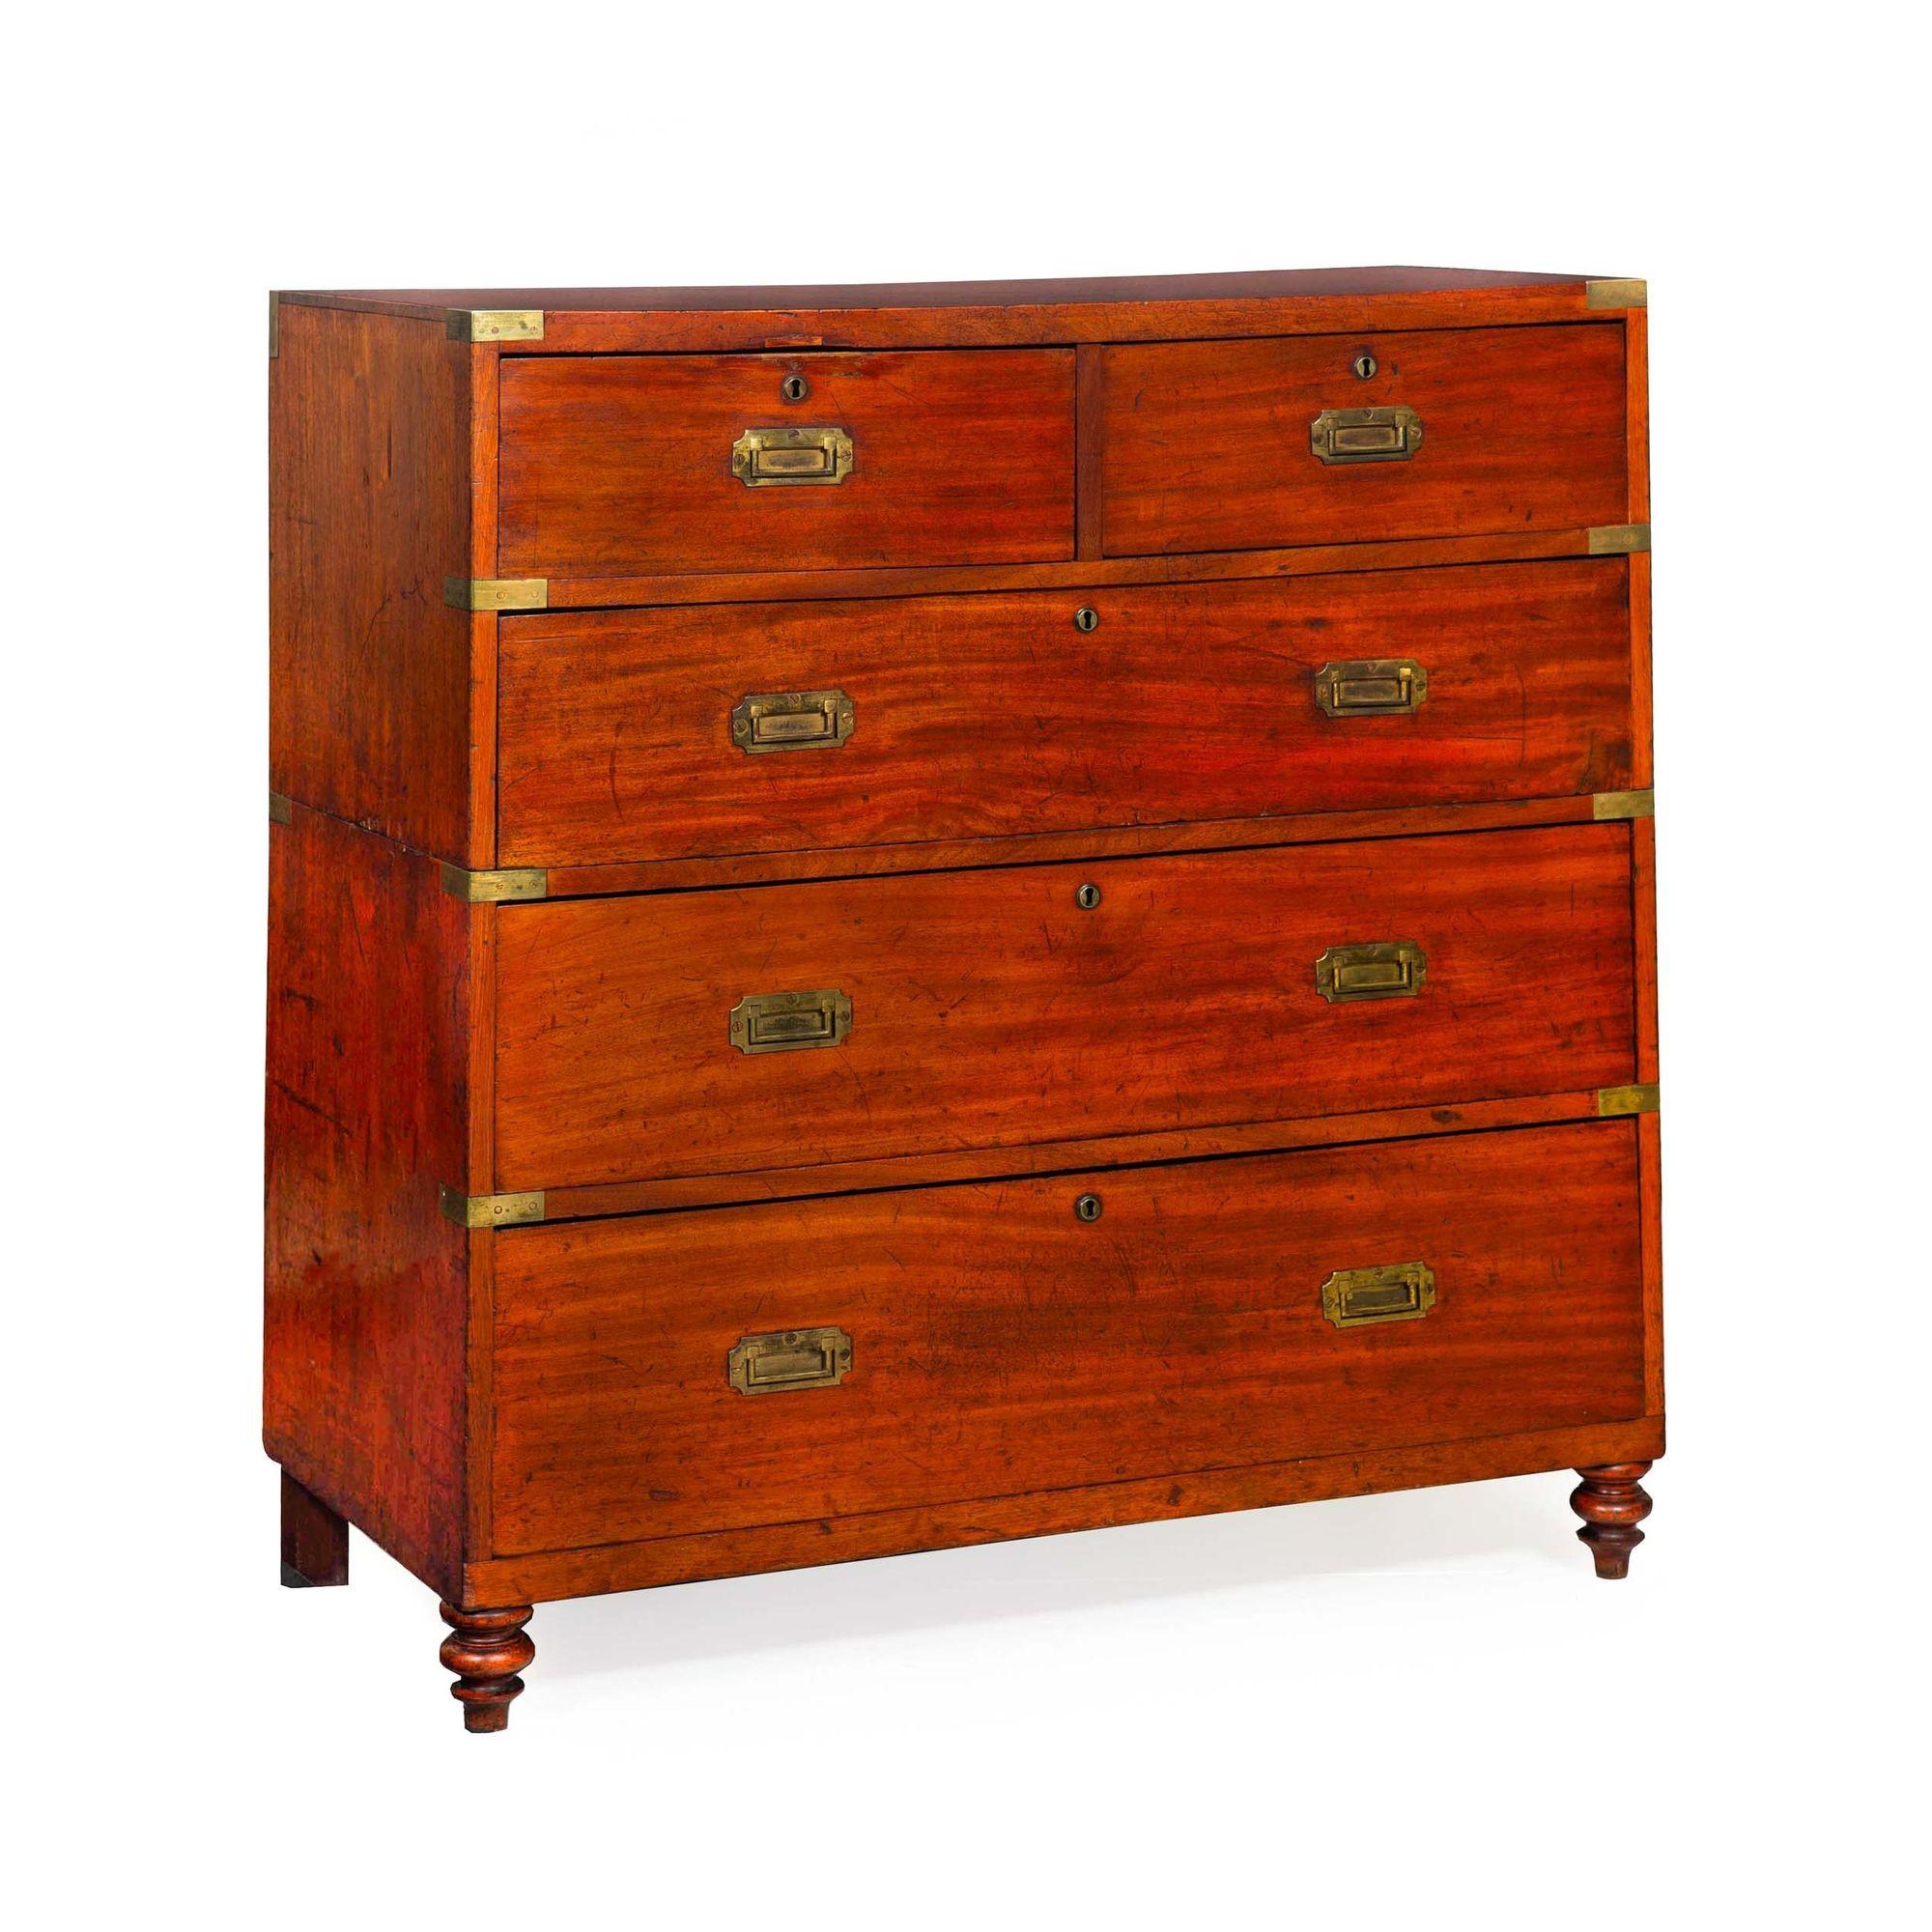 IRISH BRASS-BOUND MAHOGANY CAMPAIGN CHEST
Dublin, circa mid-19th century  top left drawer with original maker's stamp for Ross & Co of Dublin
Item # 404BHP26Z

A very nice military campaign chest of drawers in two parts by the Dublin maker Ross &